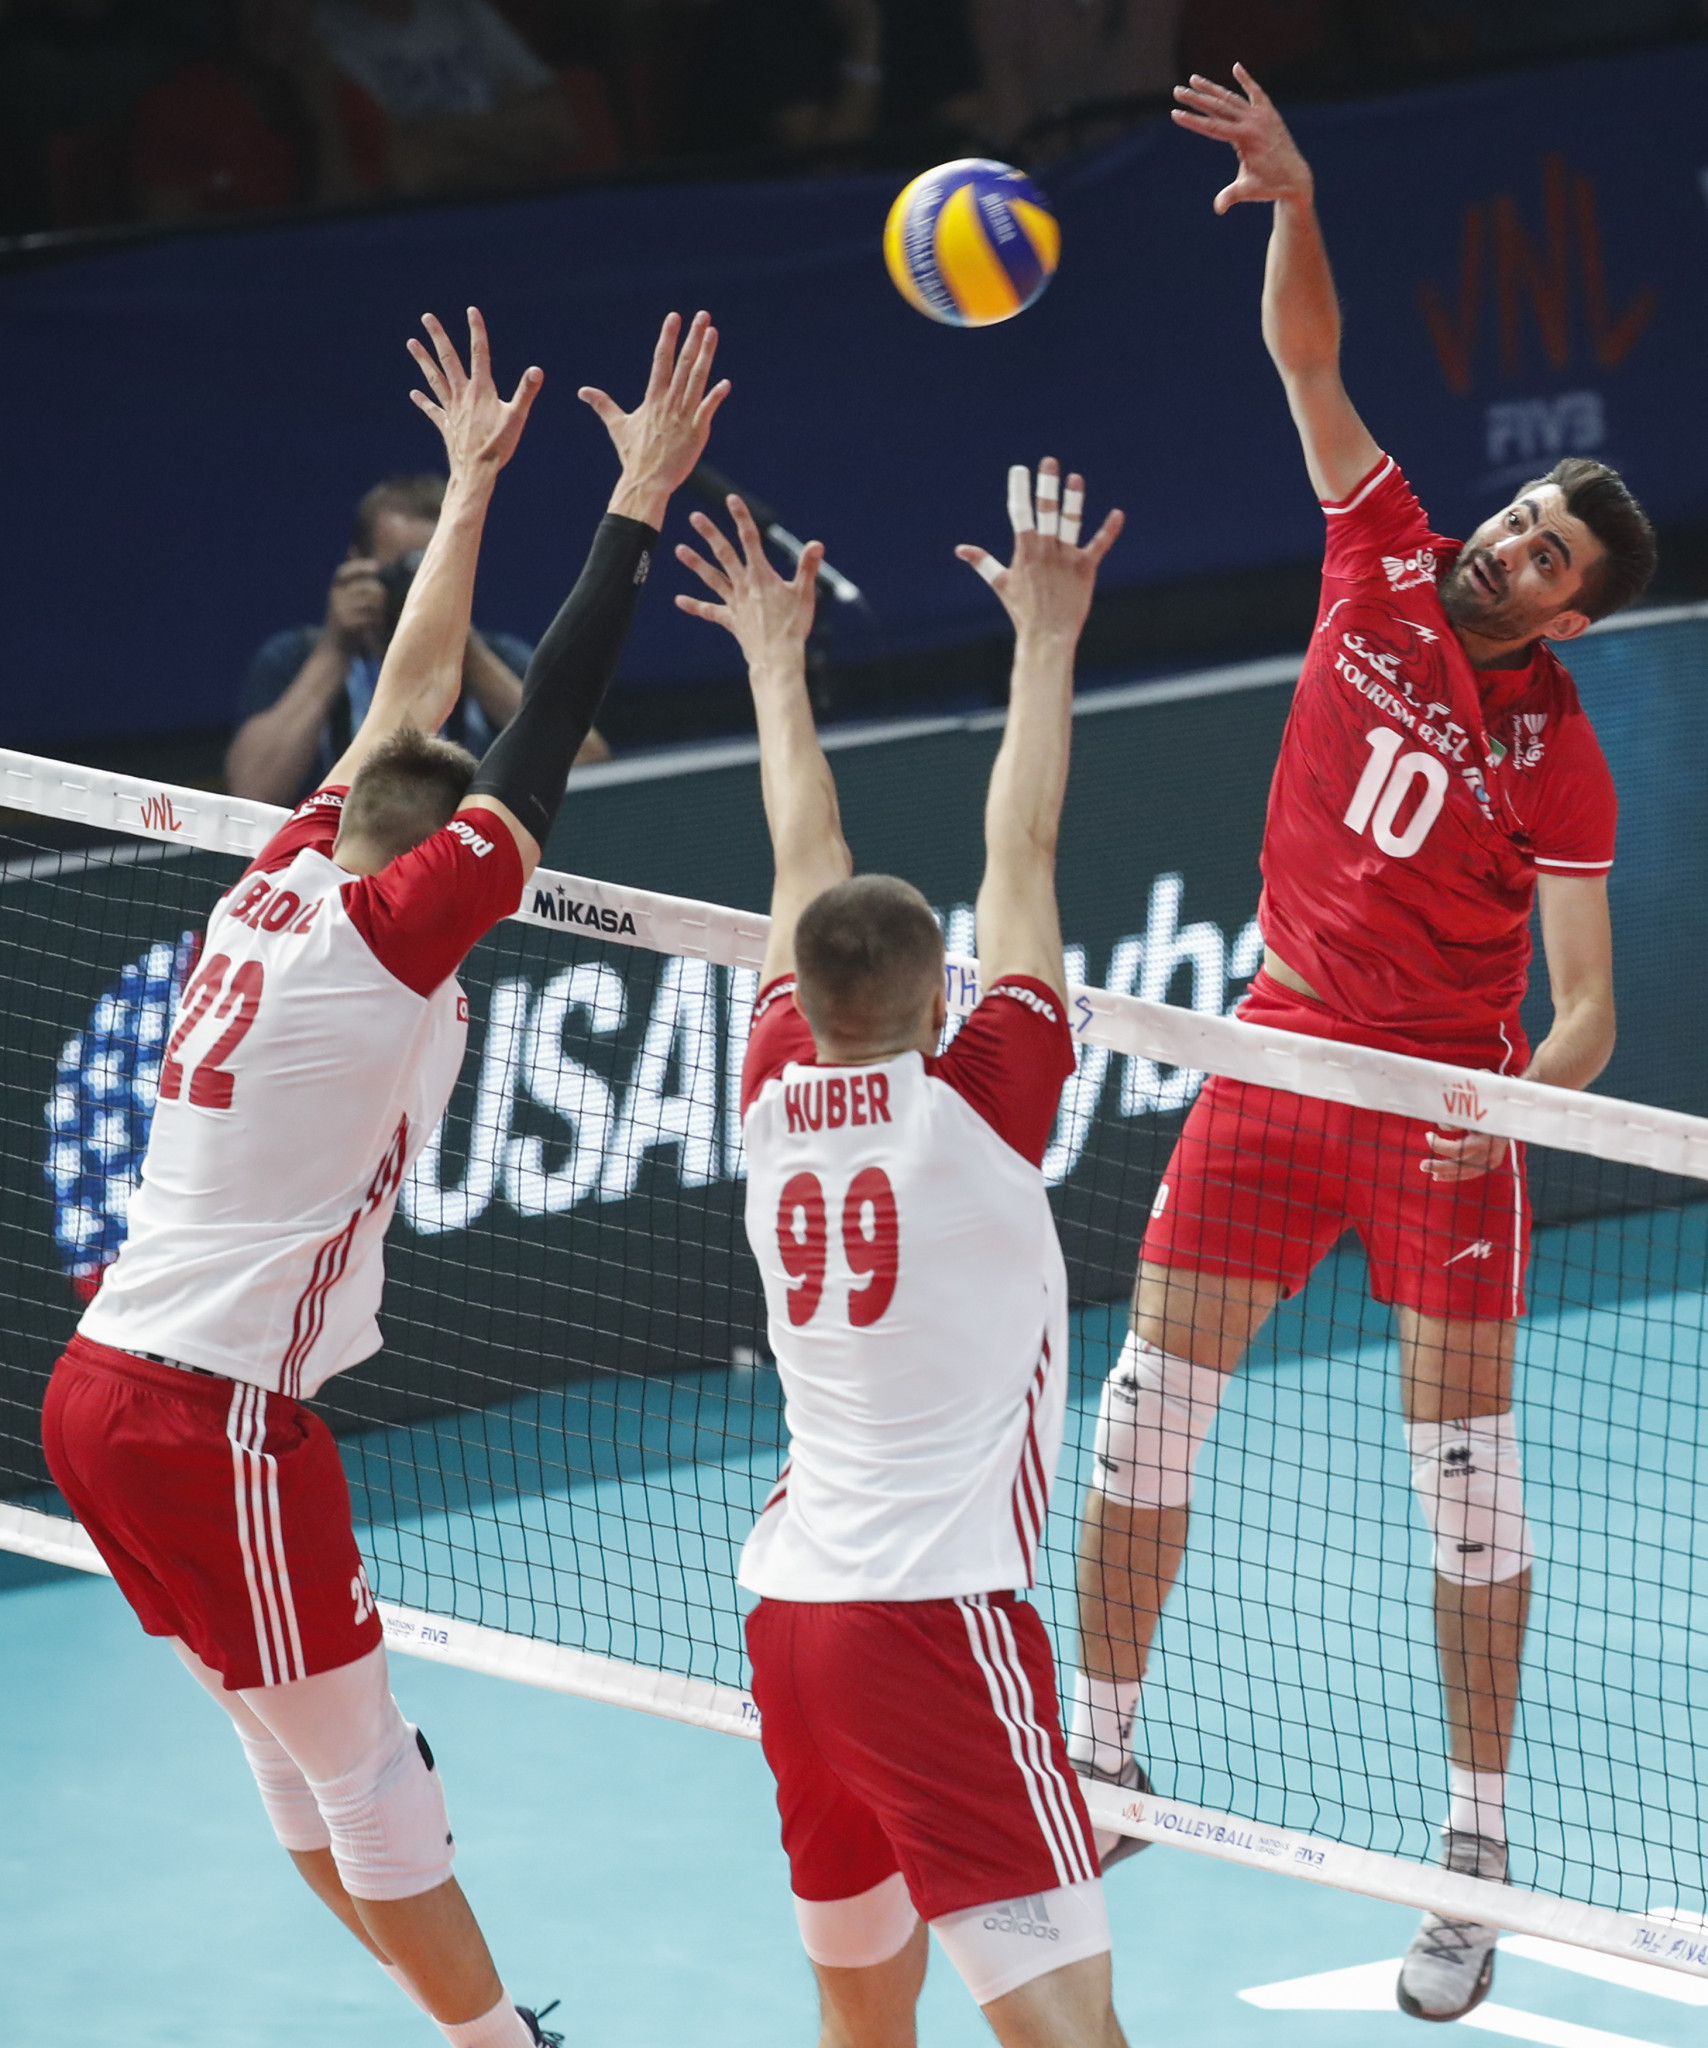 Iran will compete in a men's Olympic qualification event in January ©Getty Images